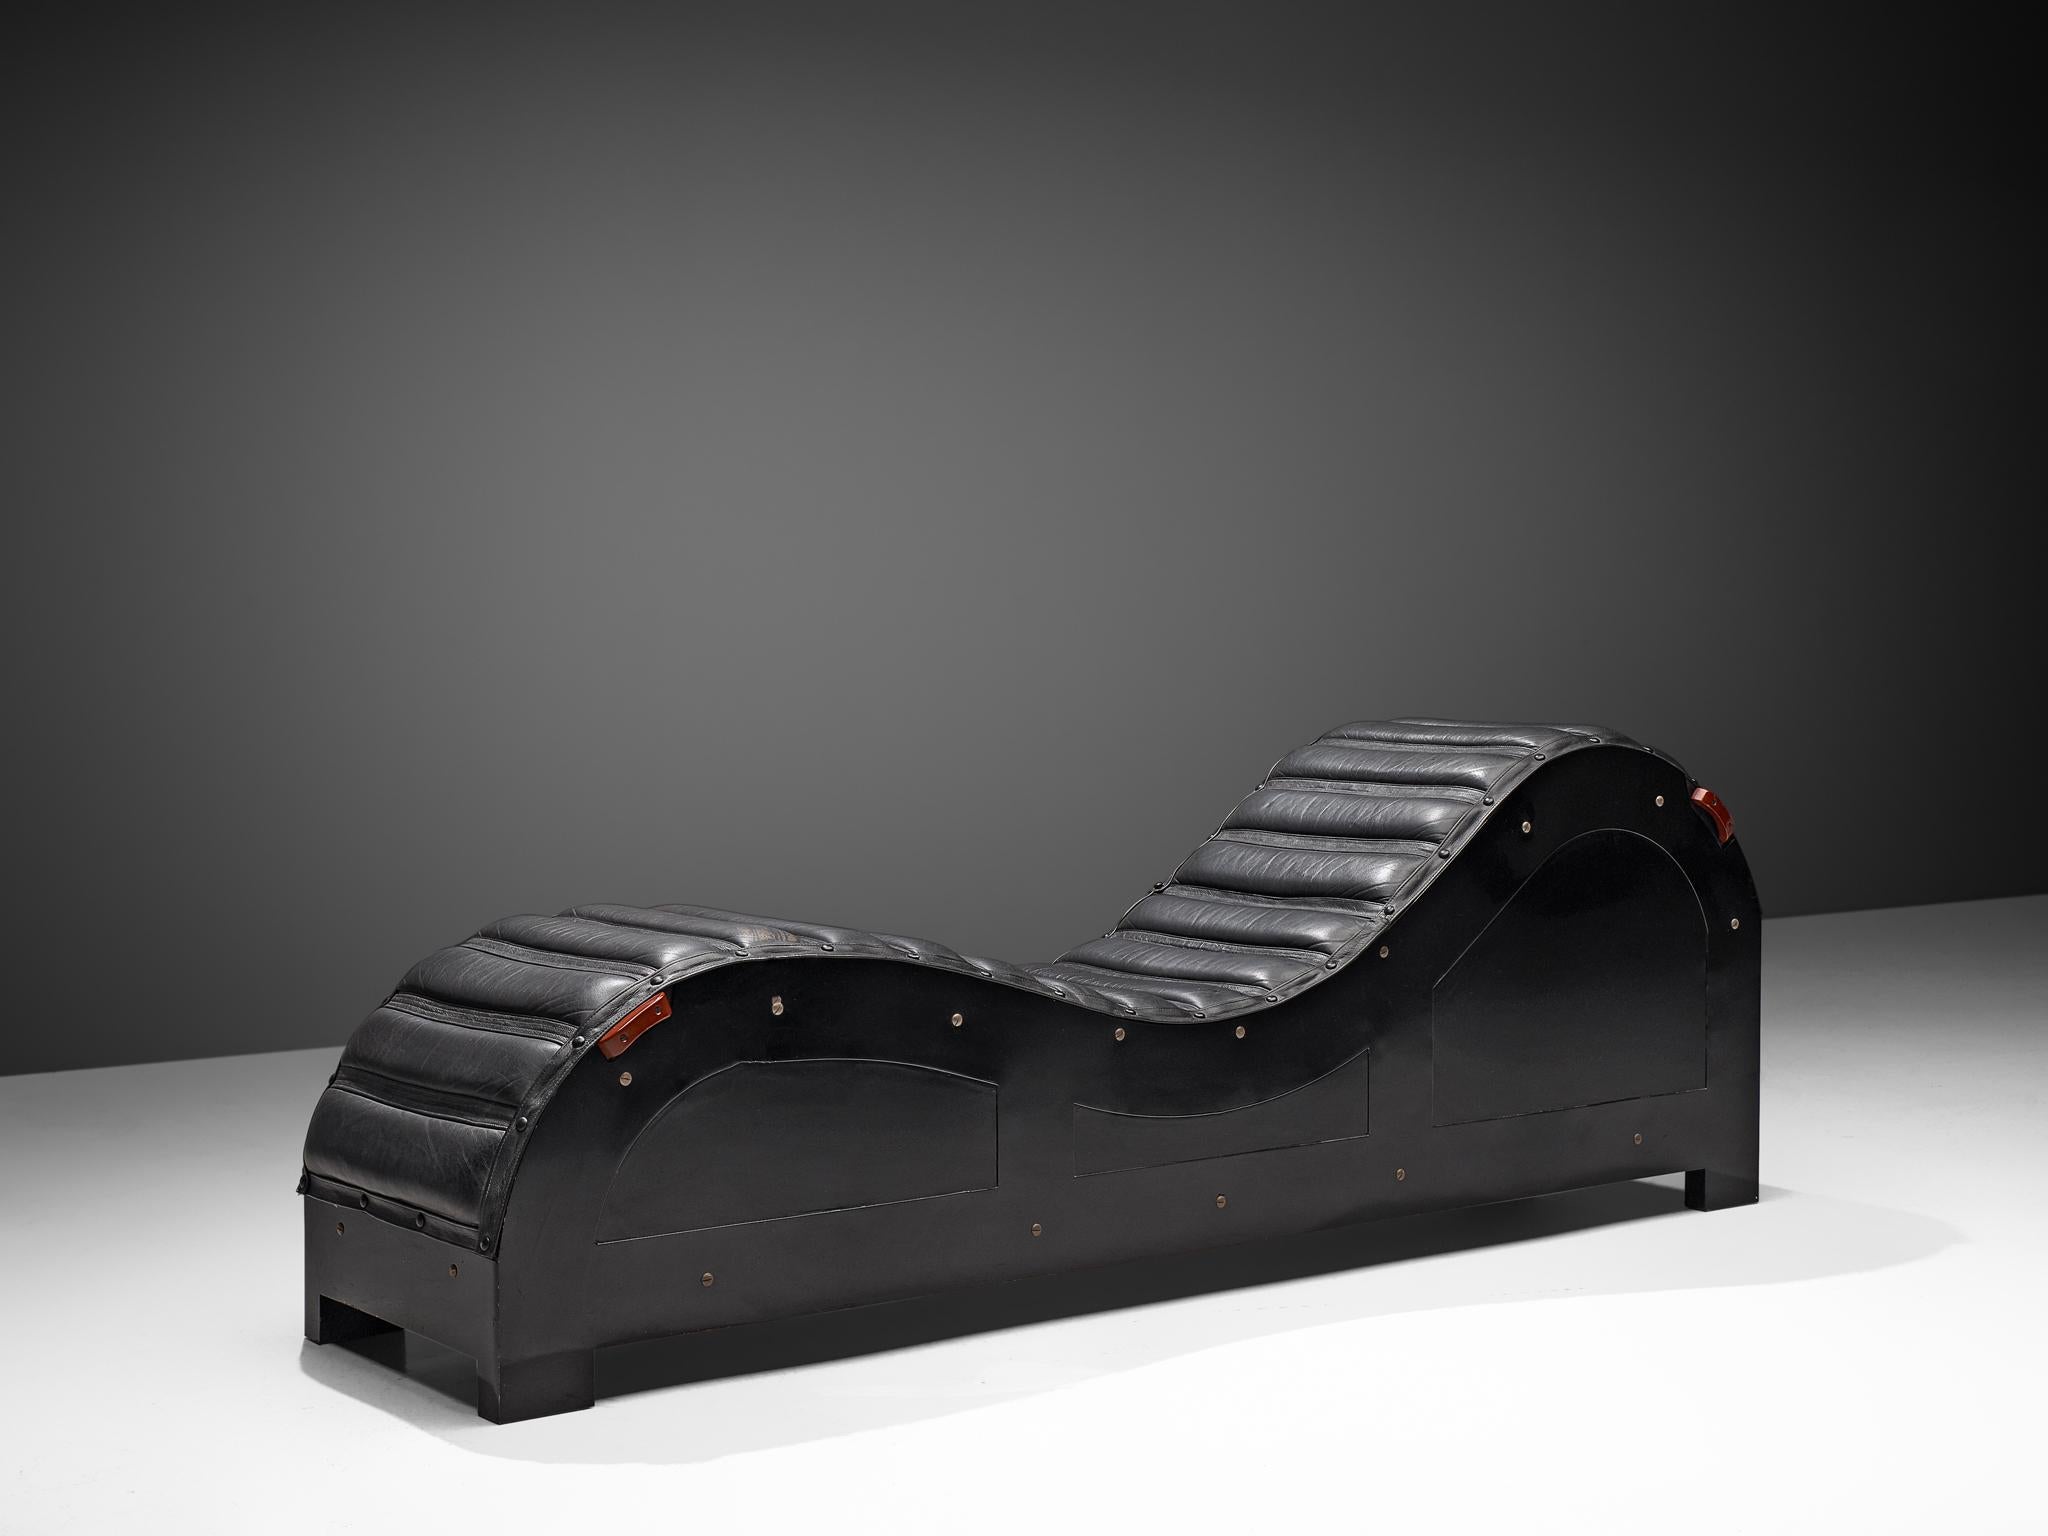 Mats Theselius for Källemo, chaise longue, leather, wood, steel, Sweden, 1992

Limited edition daybed. This chaise was designed by Swedish Mats Theselius. It consists of a black base with a steel frame and a black leather seating. This chaise is